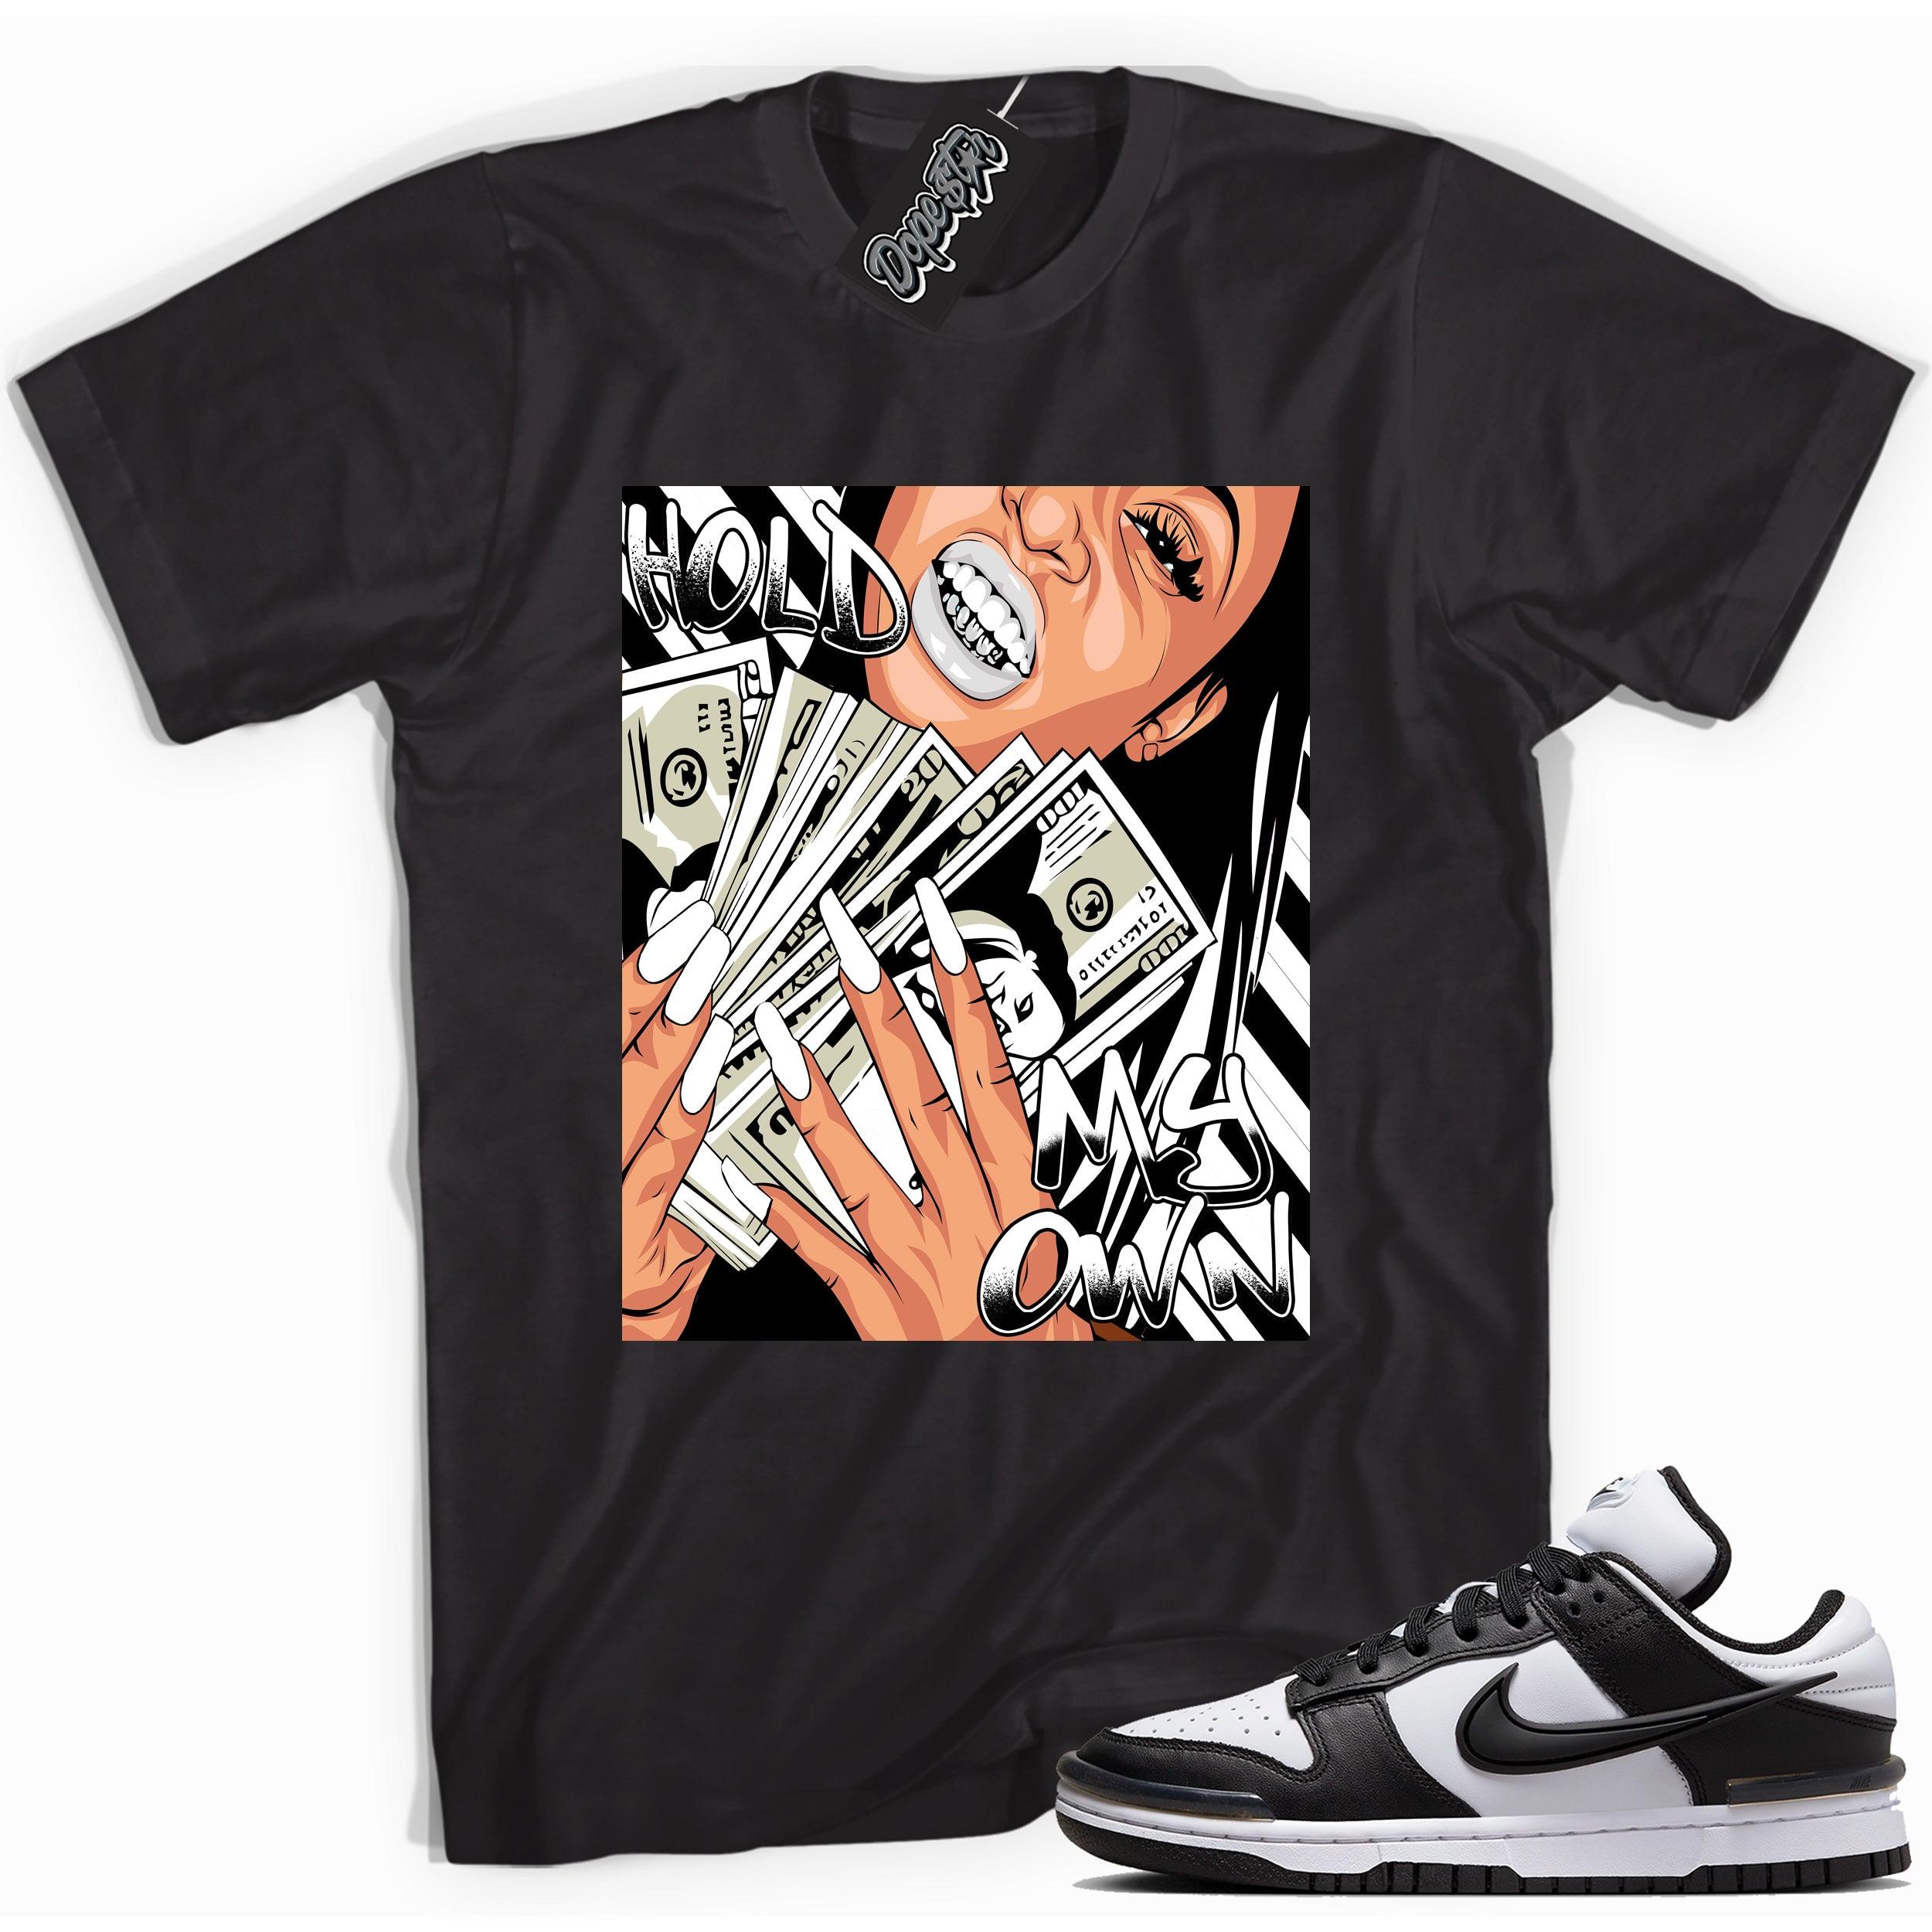 Cool black graphic tee with 'hold my own' print, that perfectly matches Nike Dunk Low Twist Panda sneakers.